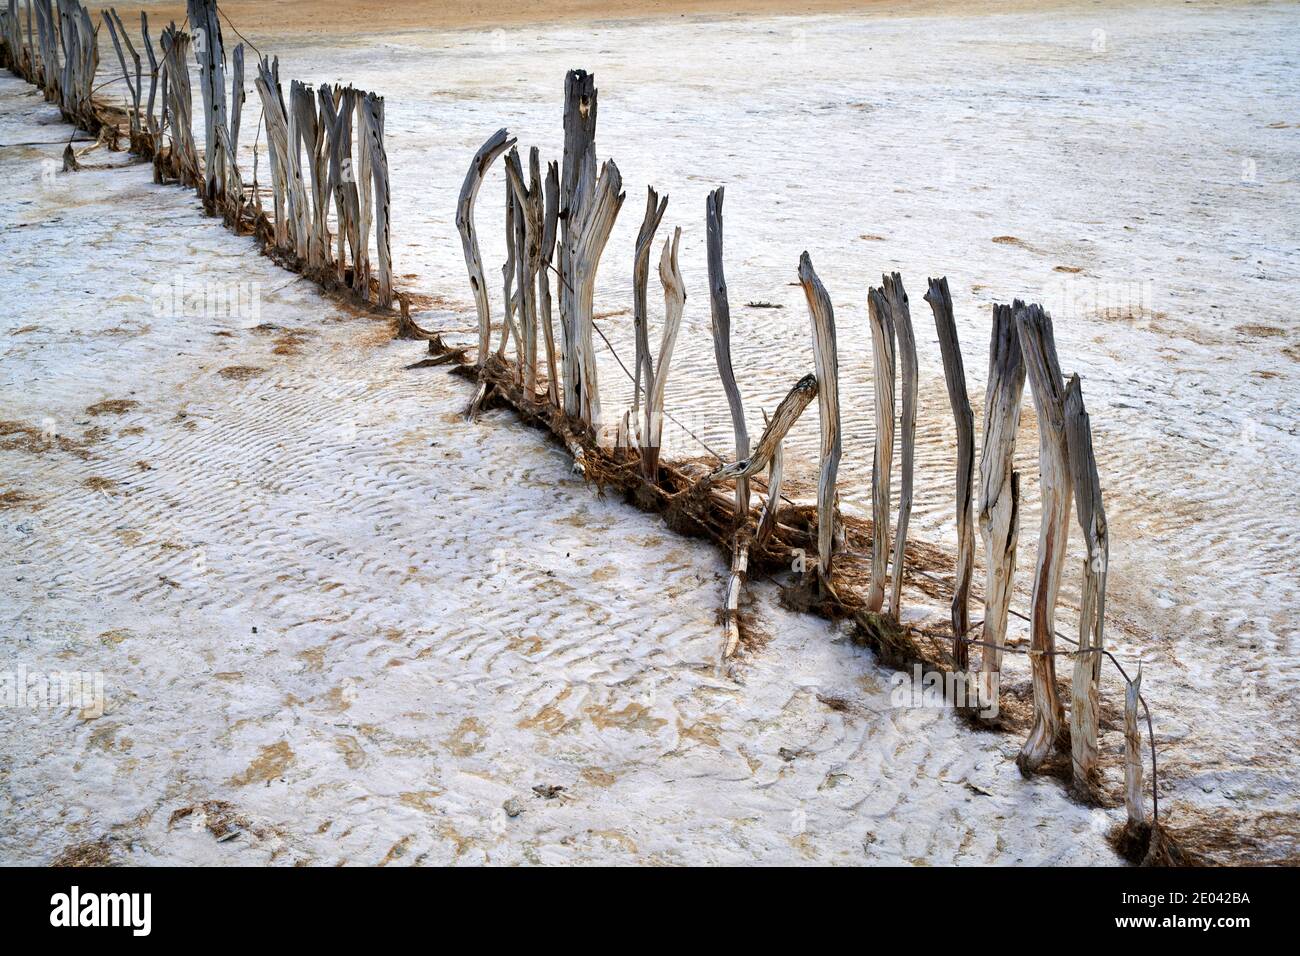 Remains of old wooden fence, The Coorong, South Australia. Stock Photo